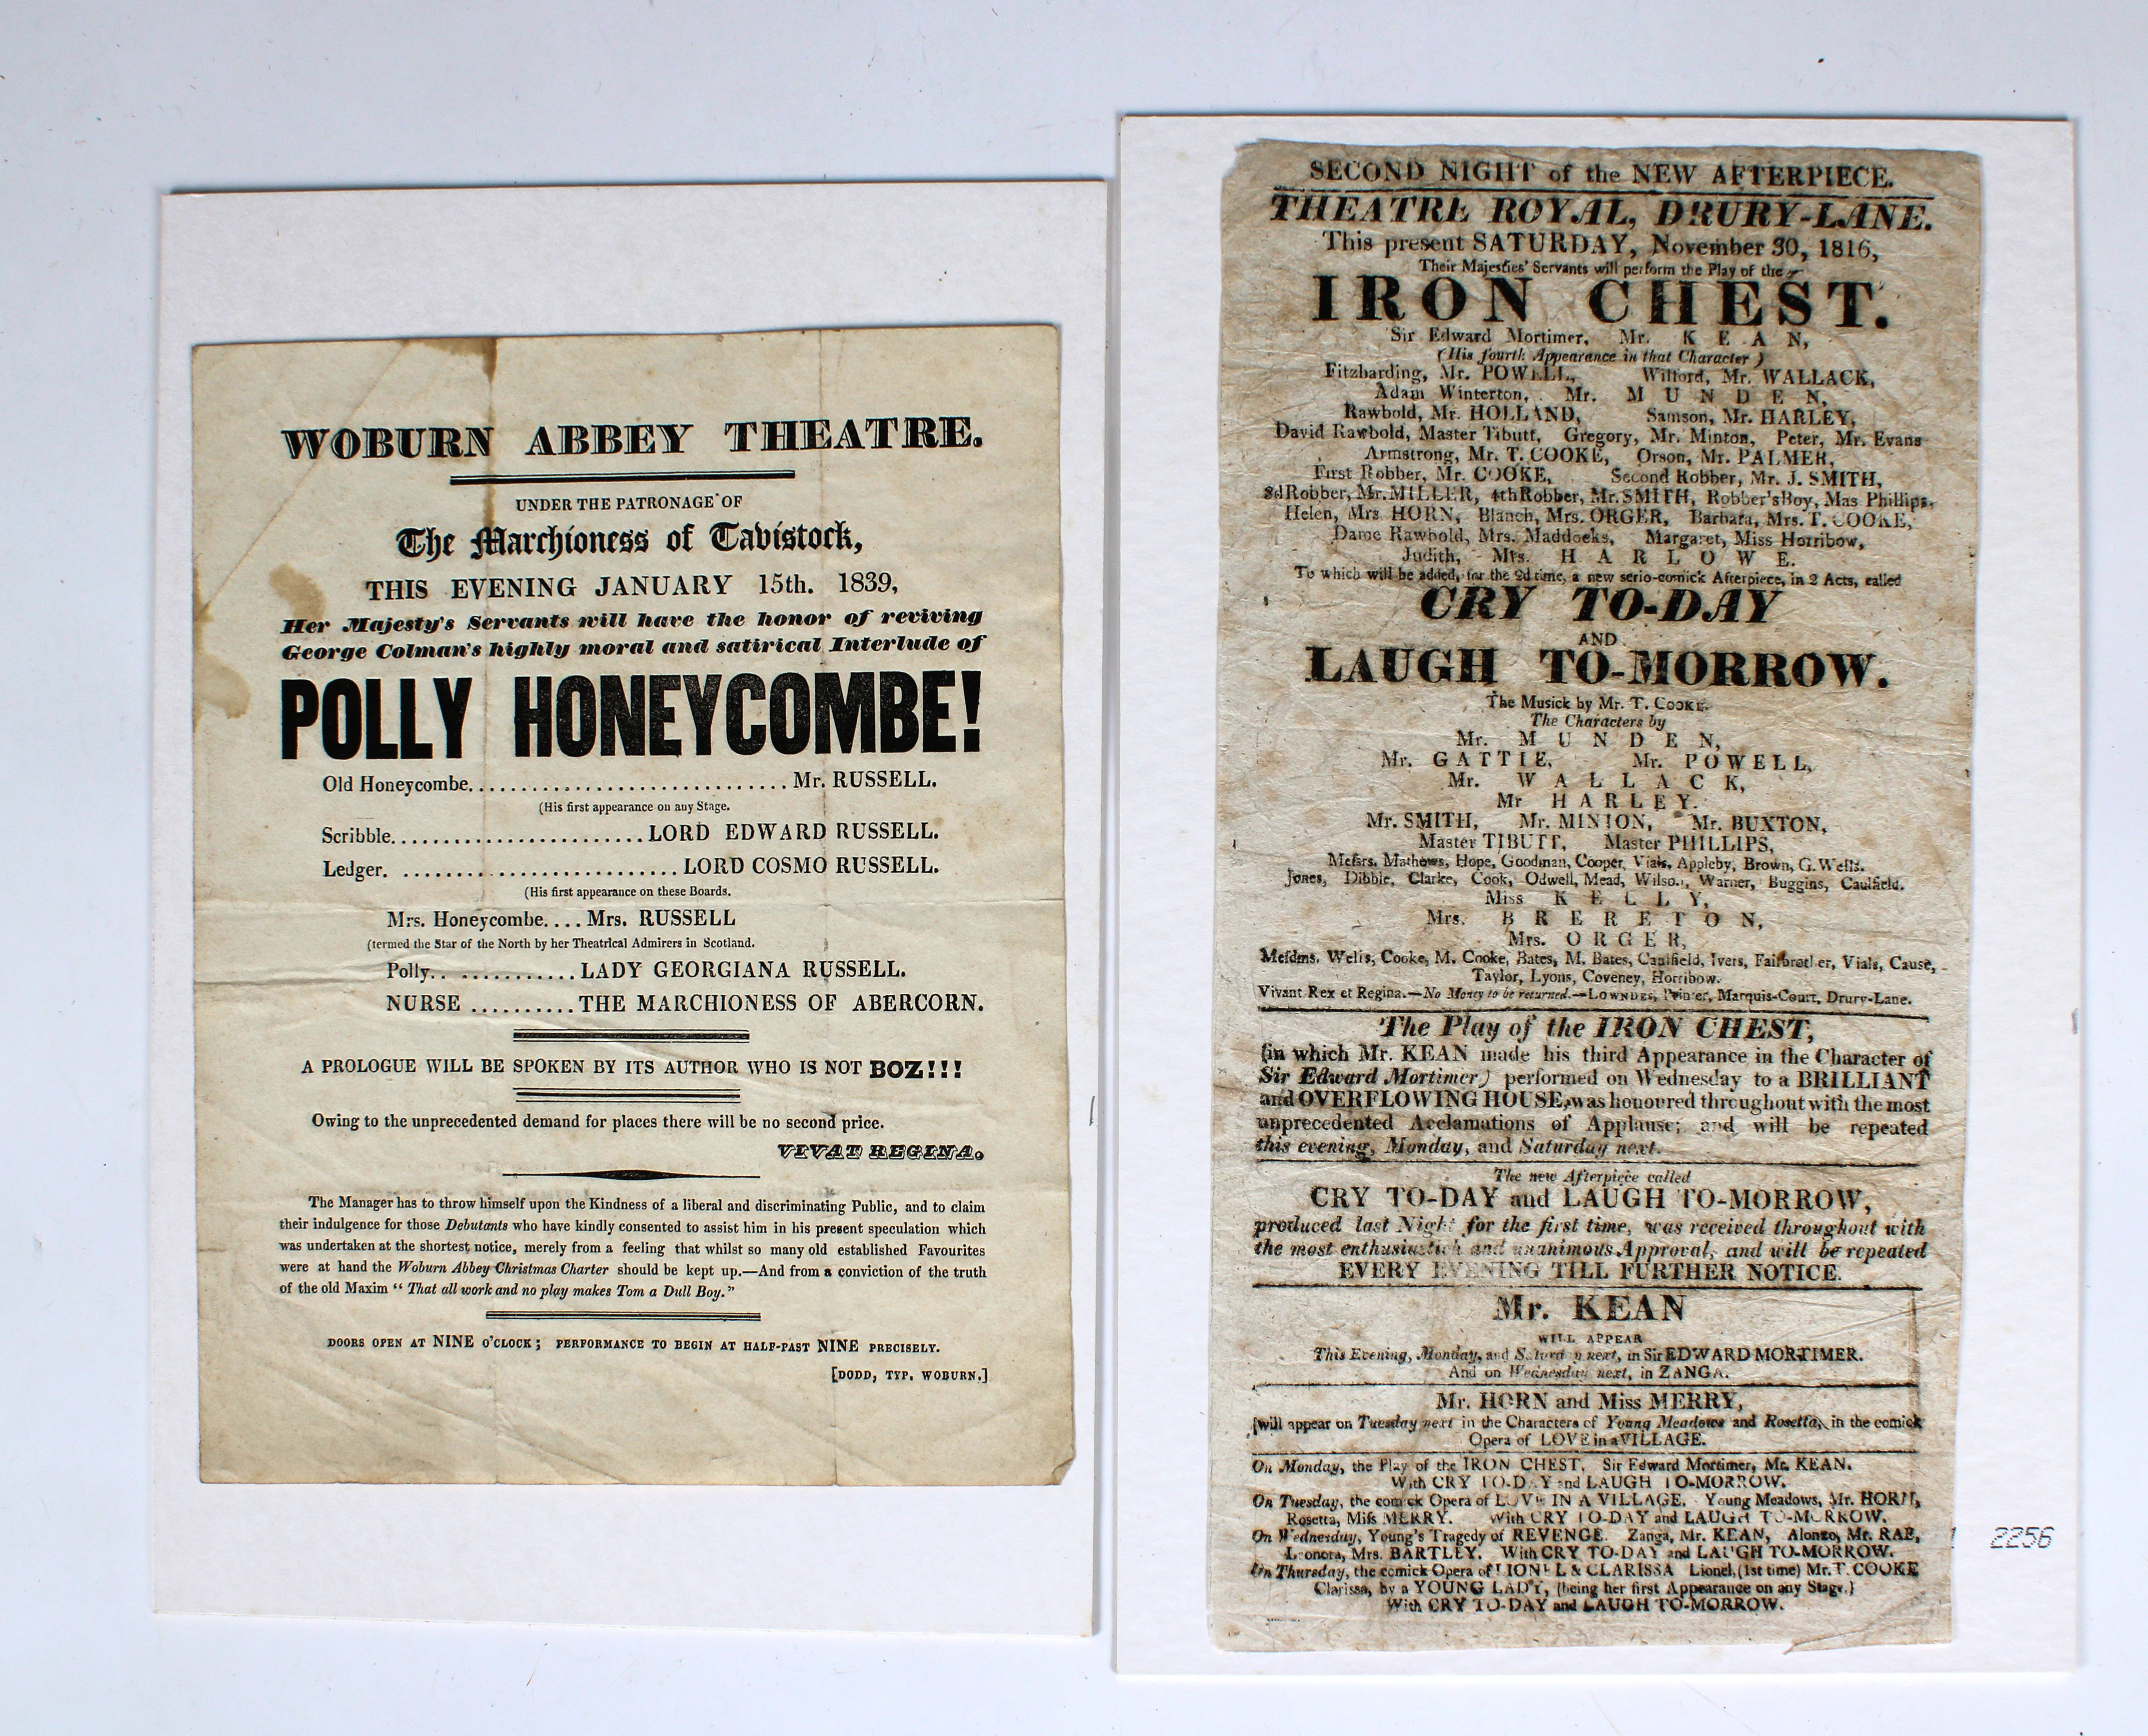 Two early 19th century theatre bills, one from the Theatre Royal, Drury Lane 1816